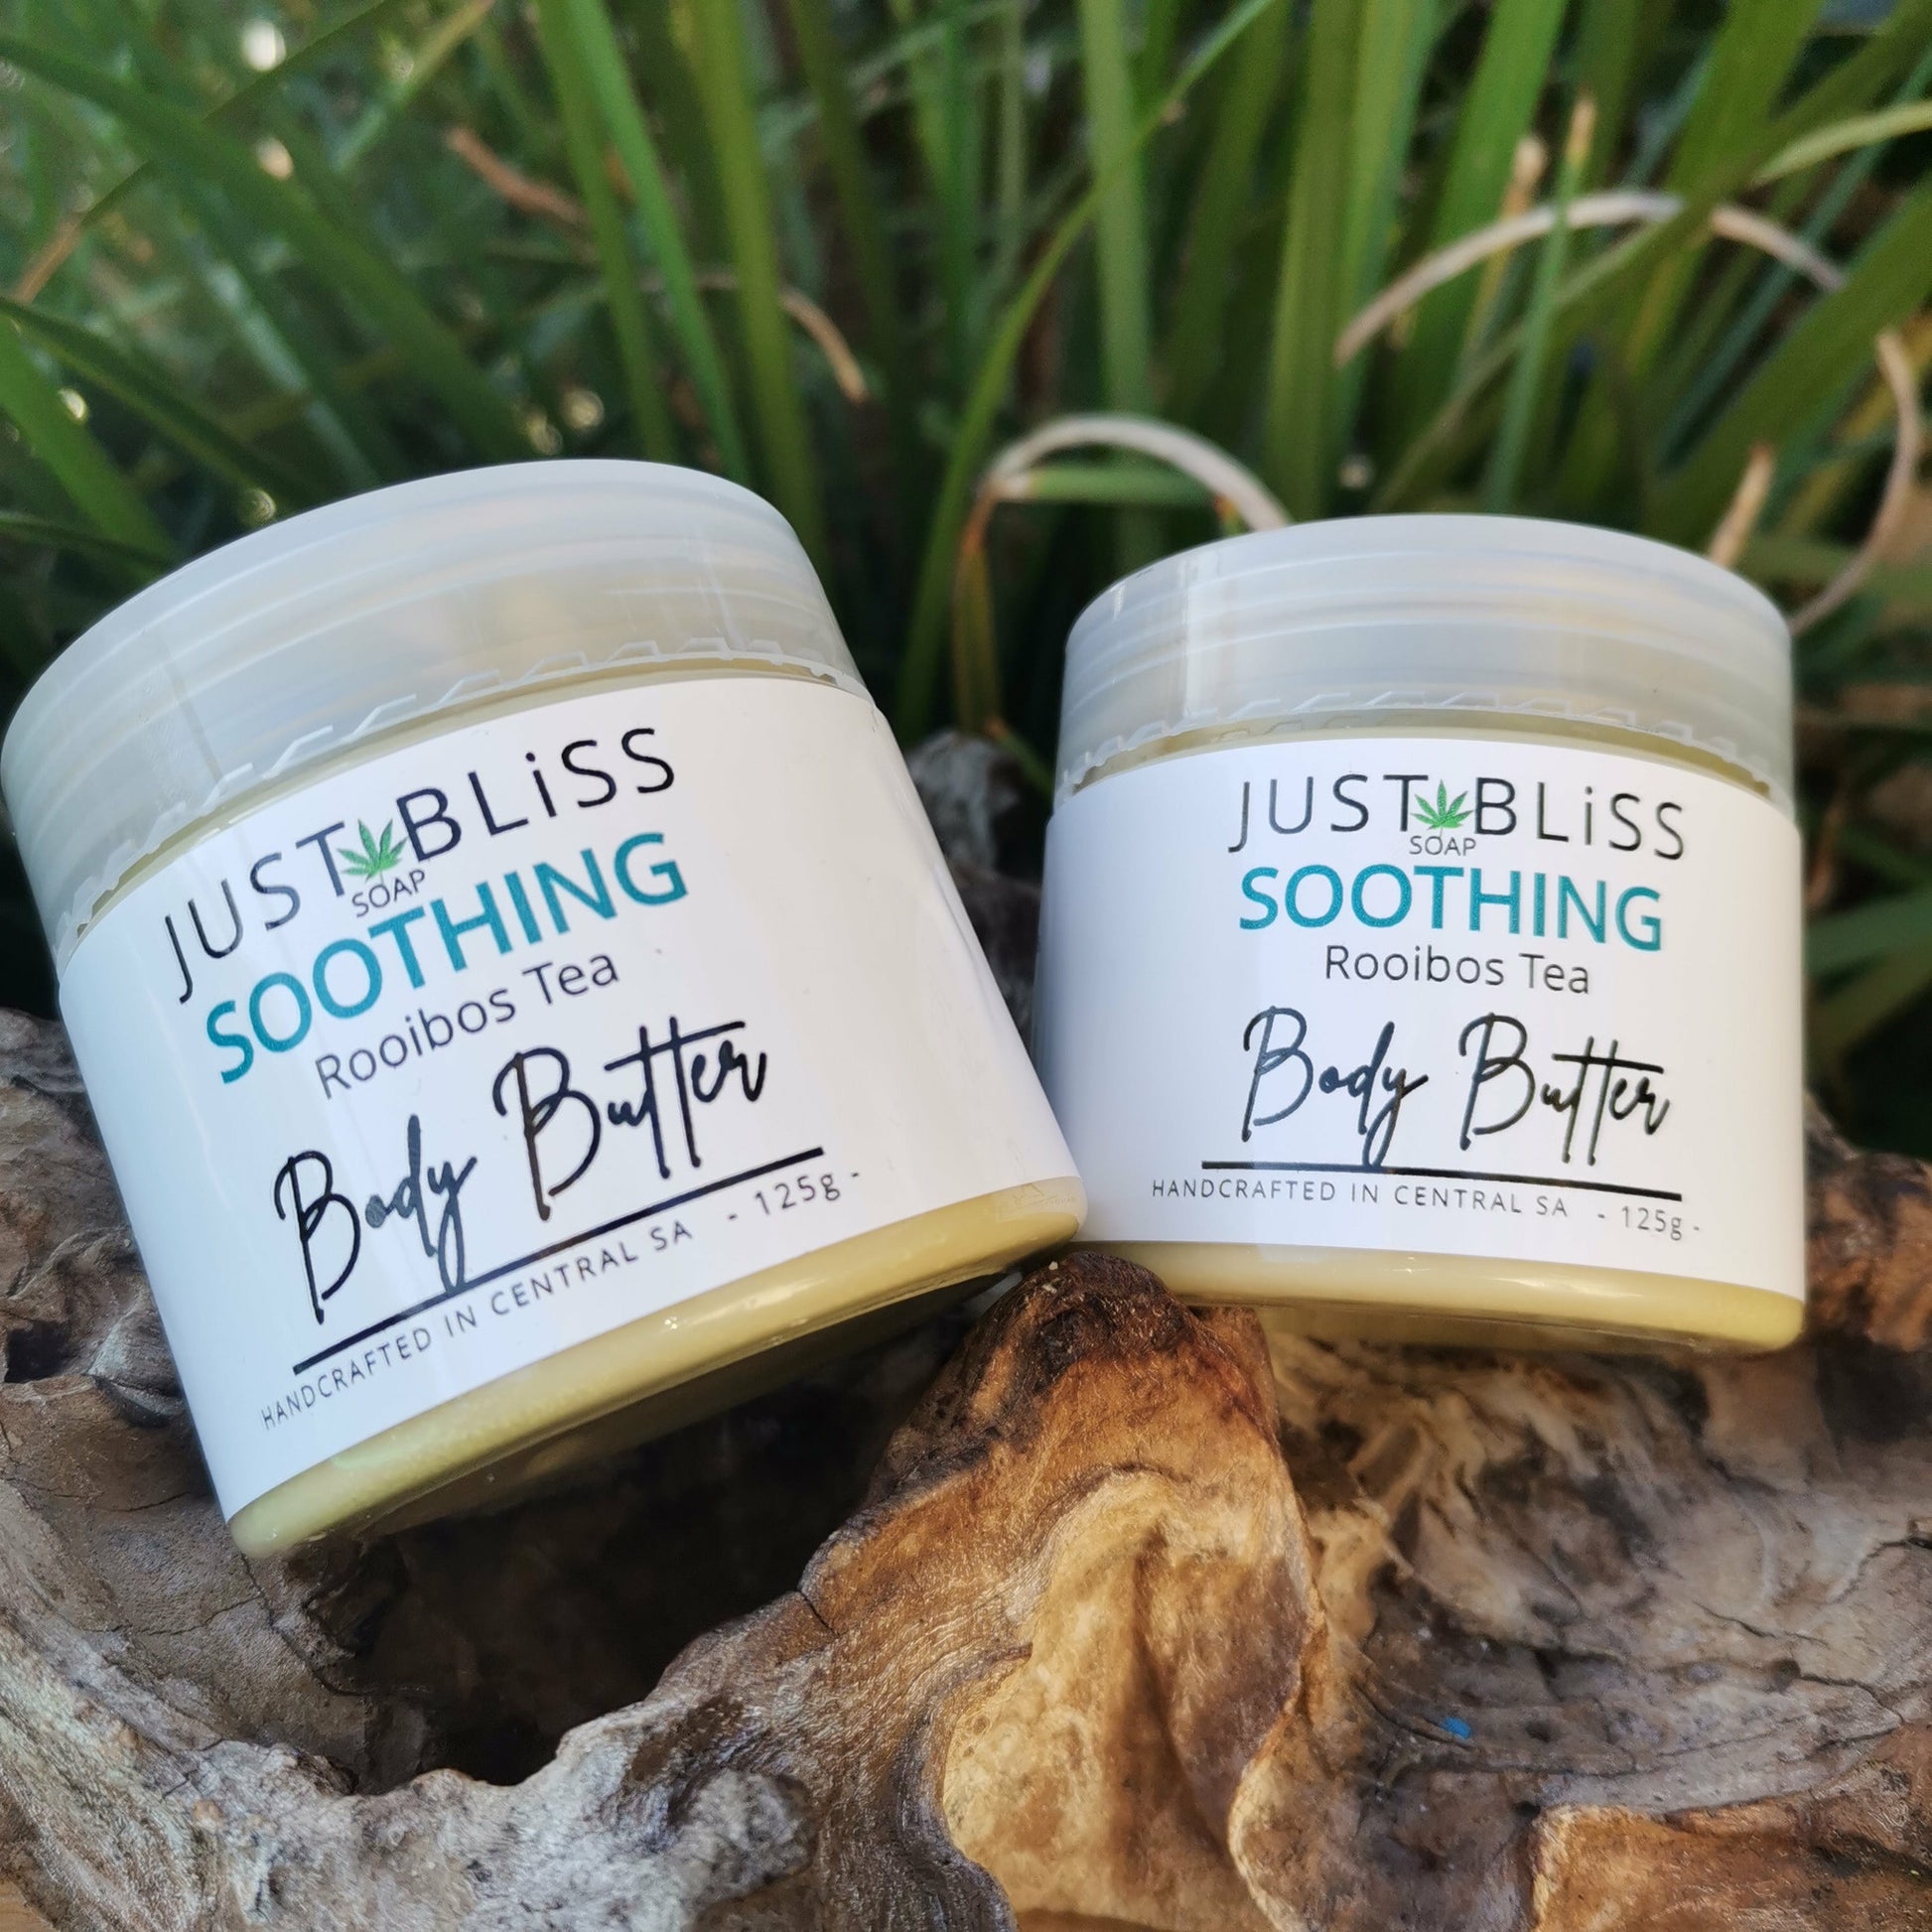 JUSTBLISS: Rooibos Tea BODY BUTTER: soothing